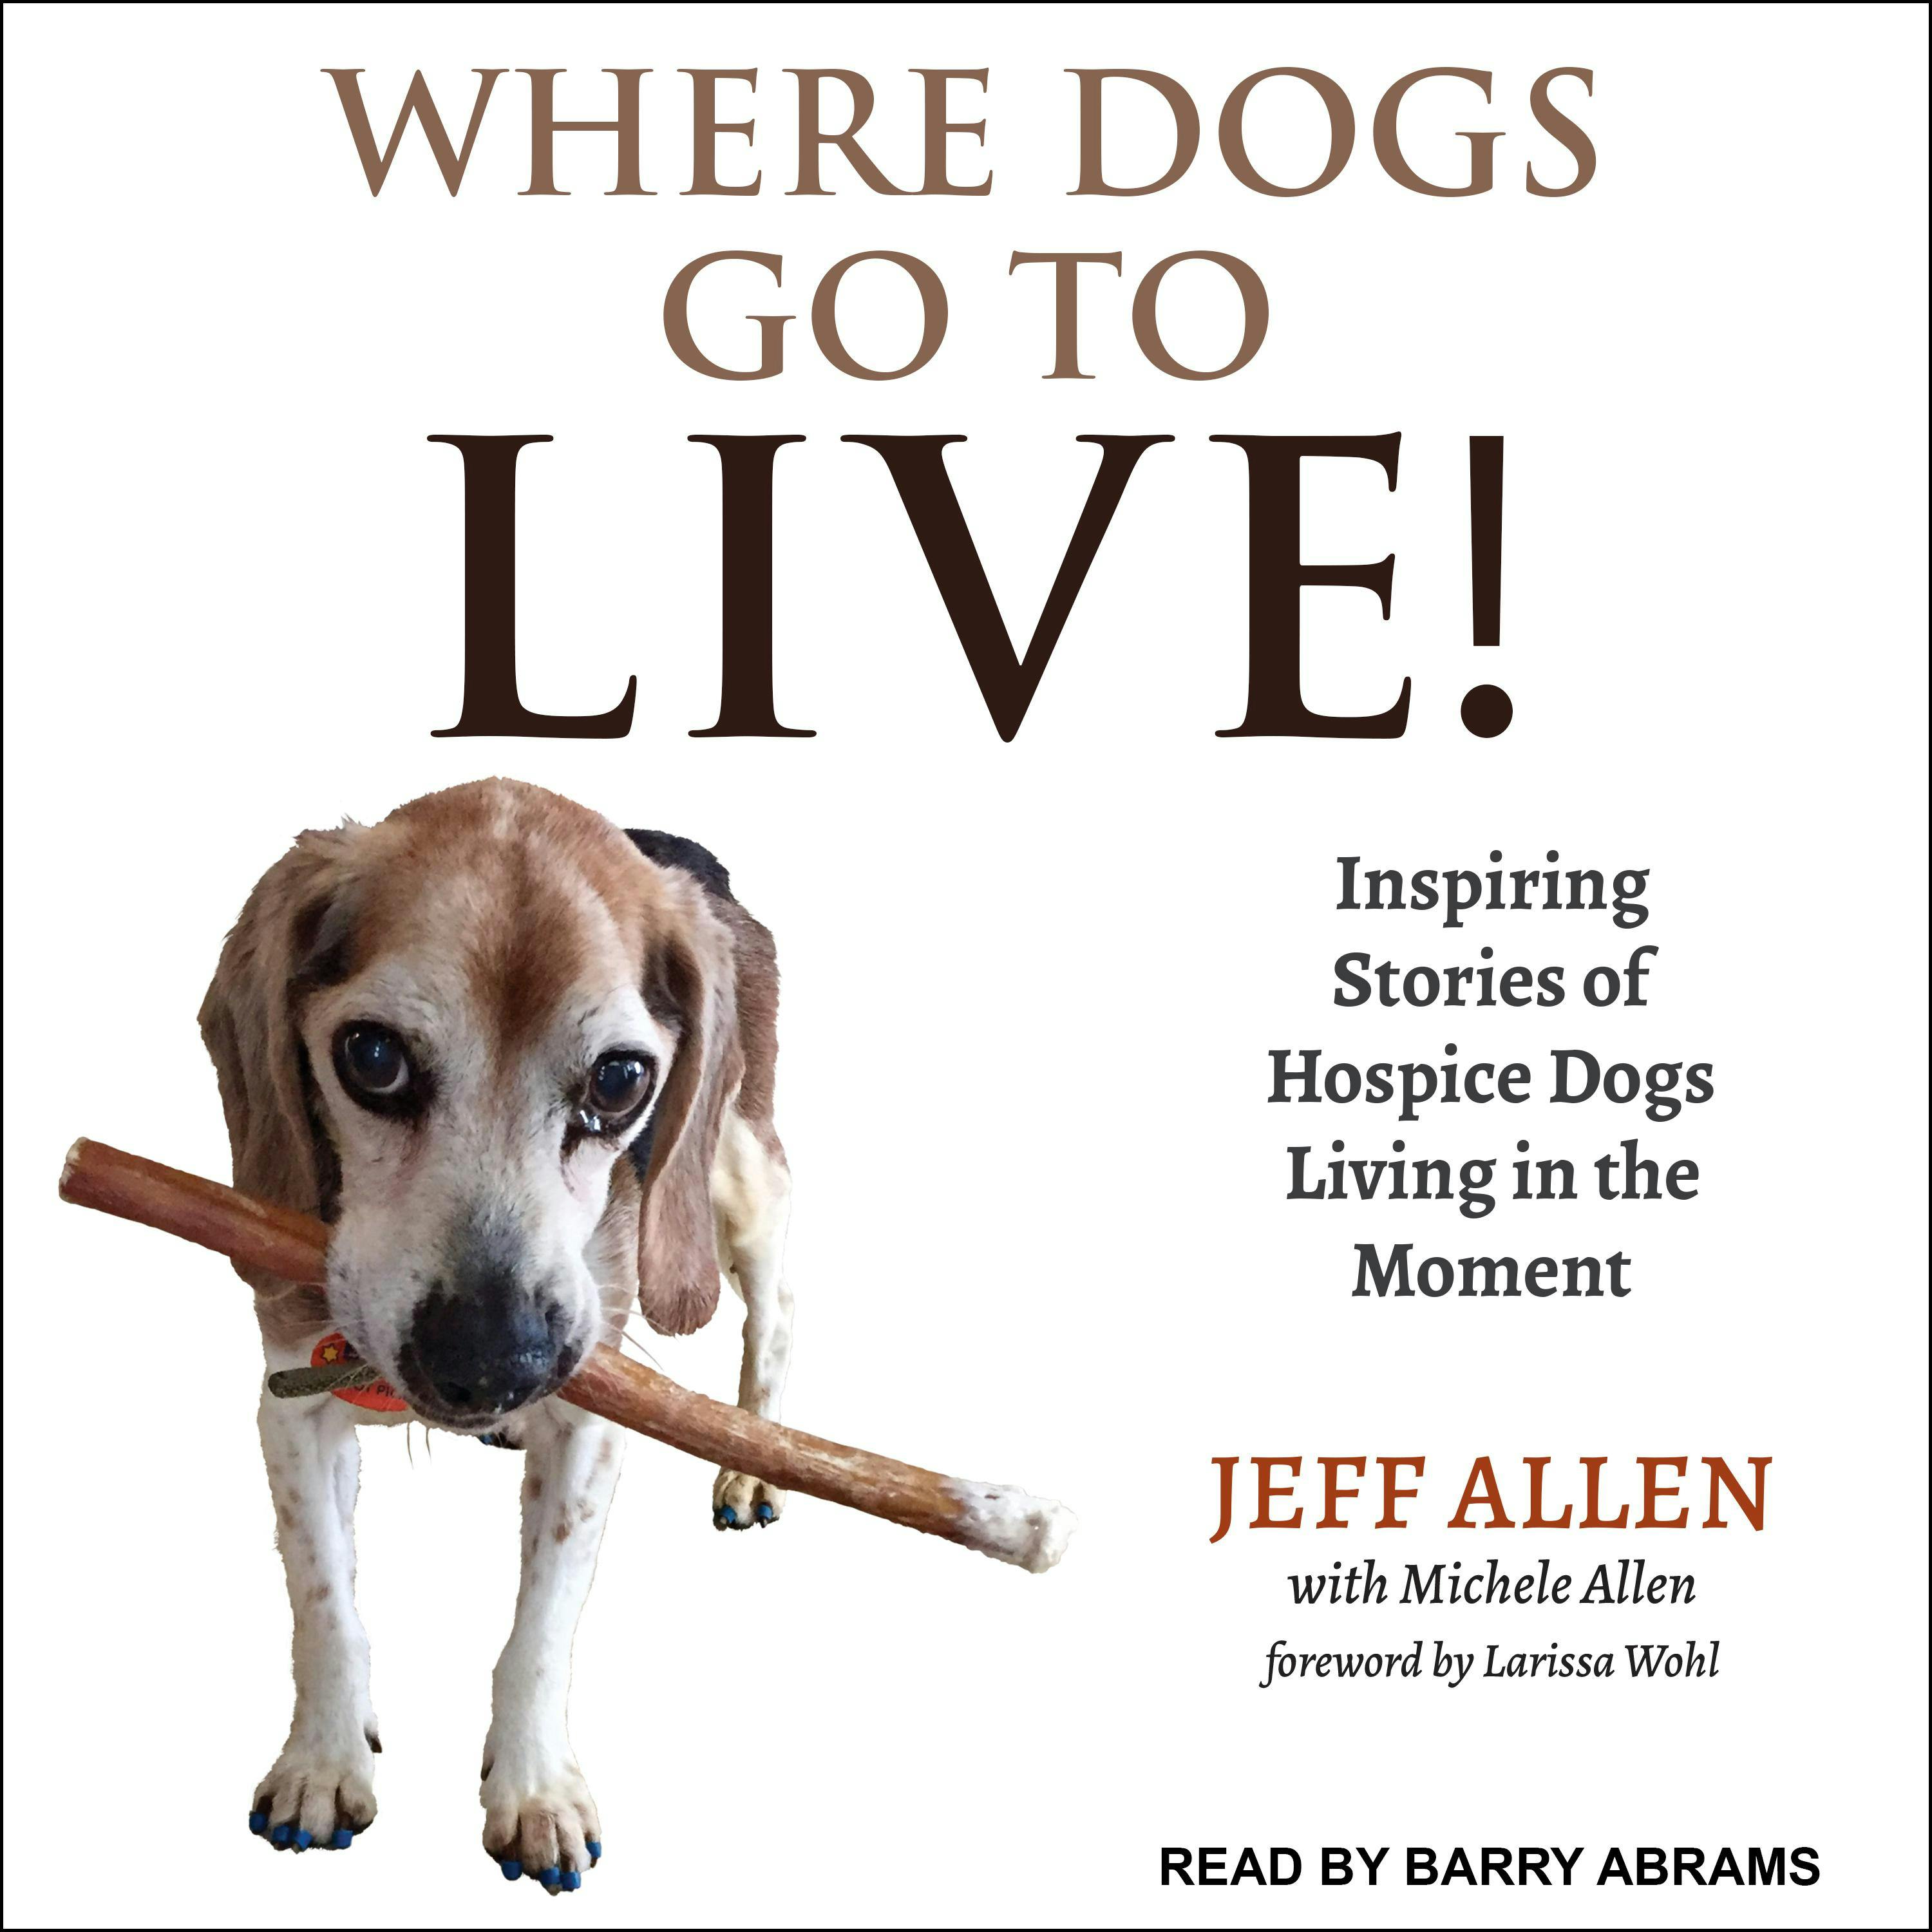 Where Dogs Go To LIVE!: Inspiring Stories of Hospice Dogs Living in the Moment - Michele Allen, Larissa Wohl, Jeff Allen